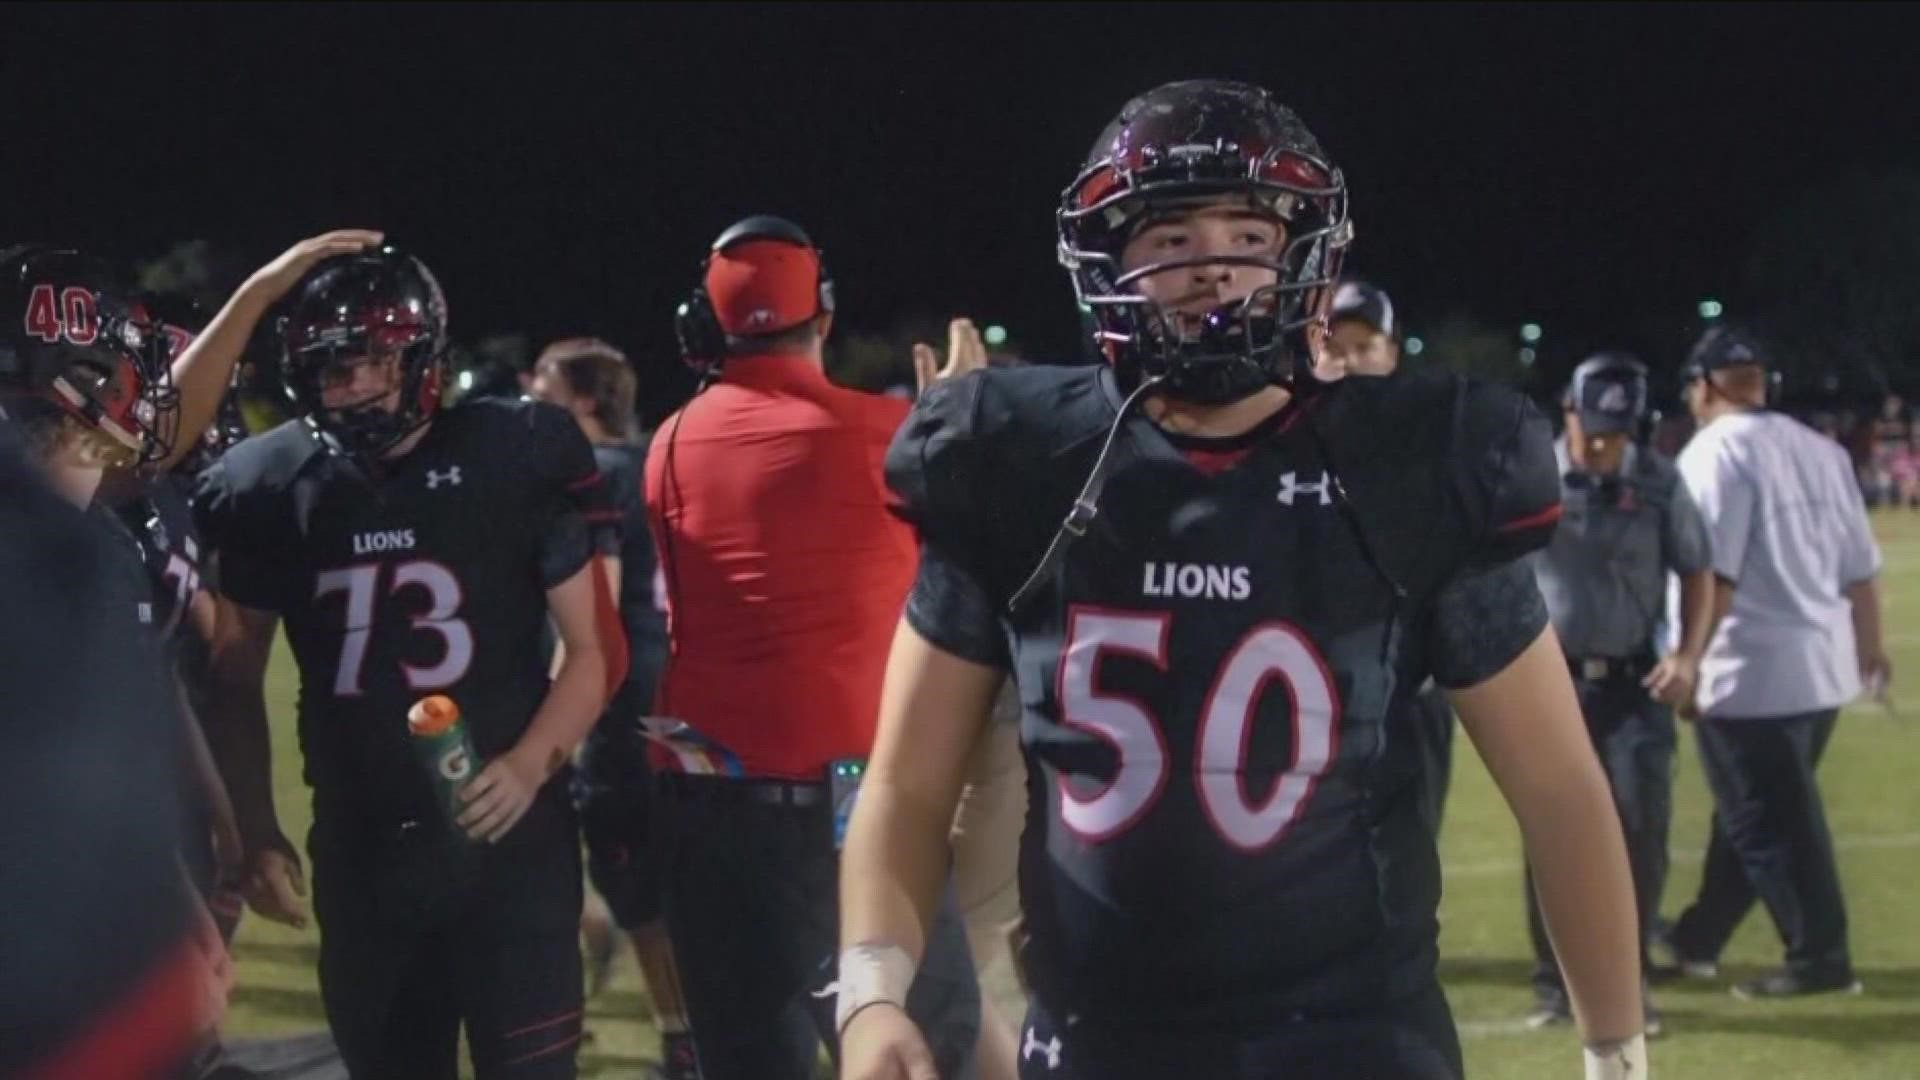 A touching tribute on a West Valley high school campus took place Friday. Liberty High School in Peoria honored Zach Hunzinger before the team's football opener.